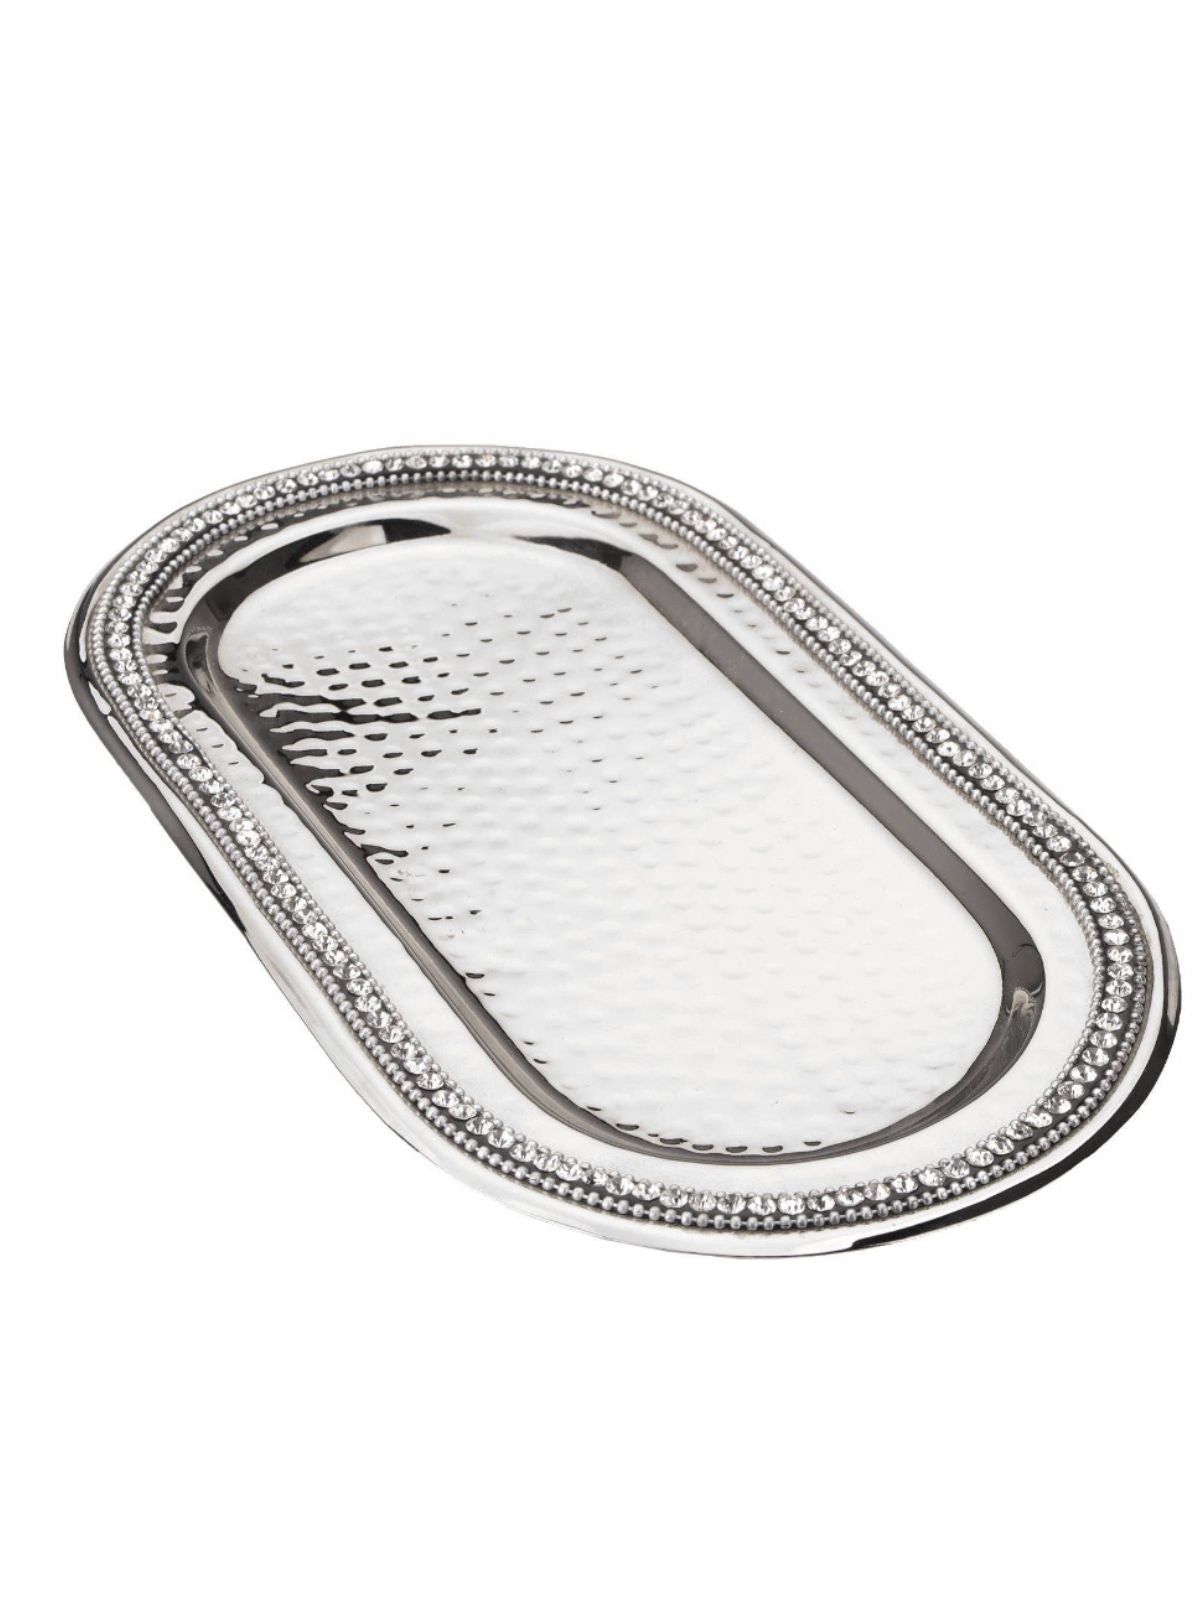 Stainless Steel Oval Tray with Diamond Edges